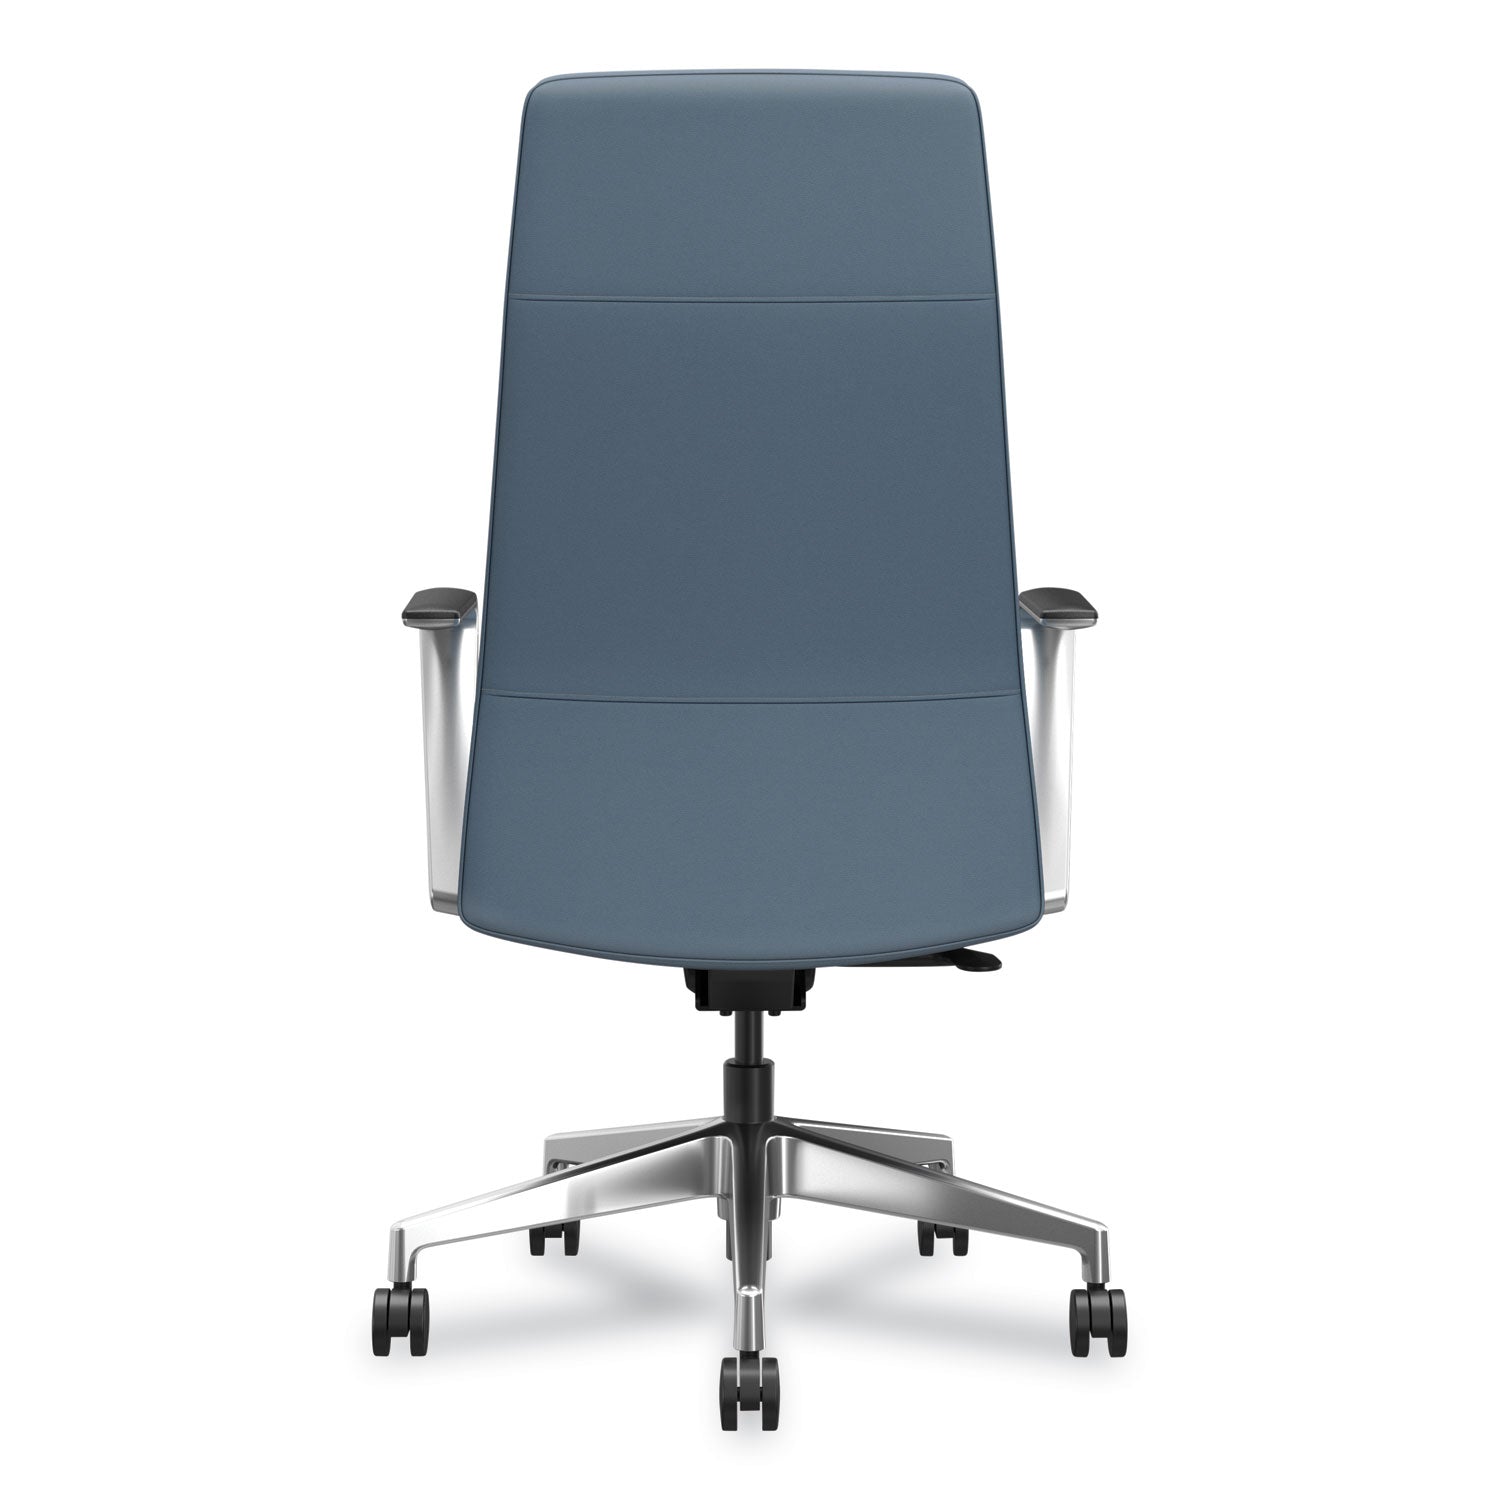 cofi-executive-high-back-chair-supports-up-to-300-lb-nimbus-seat-back-polished-aluminum-base-ships-in-7-10-business-days_honceuw0pu93c9p - 2